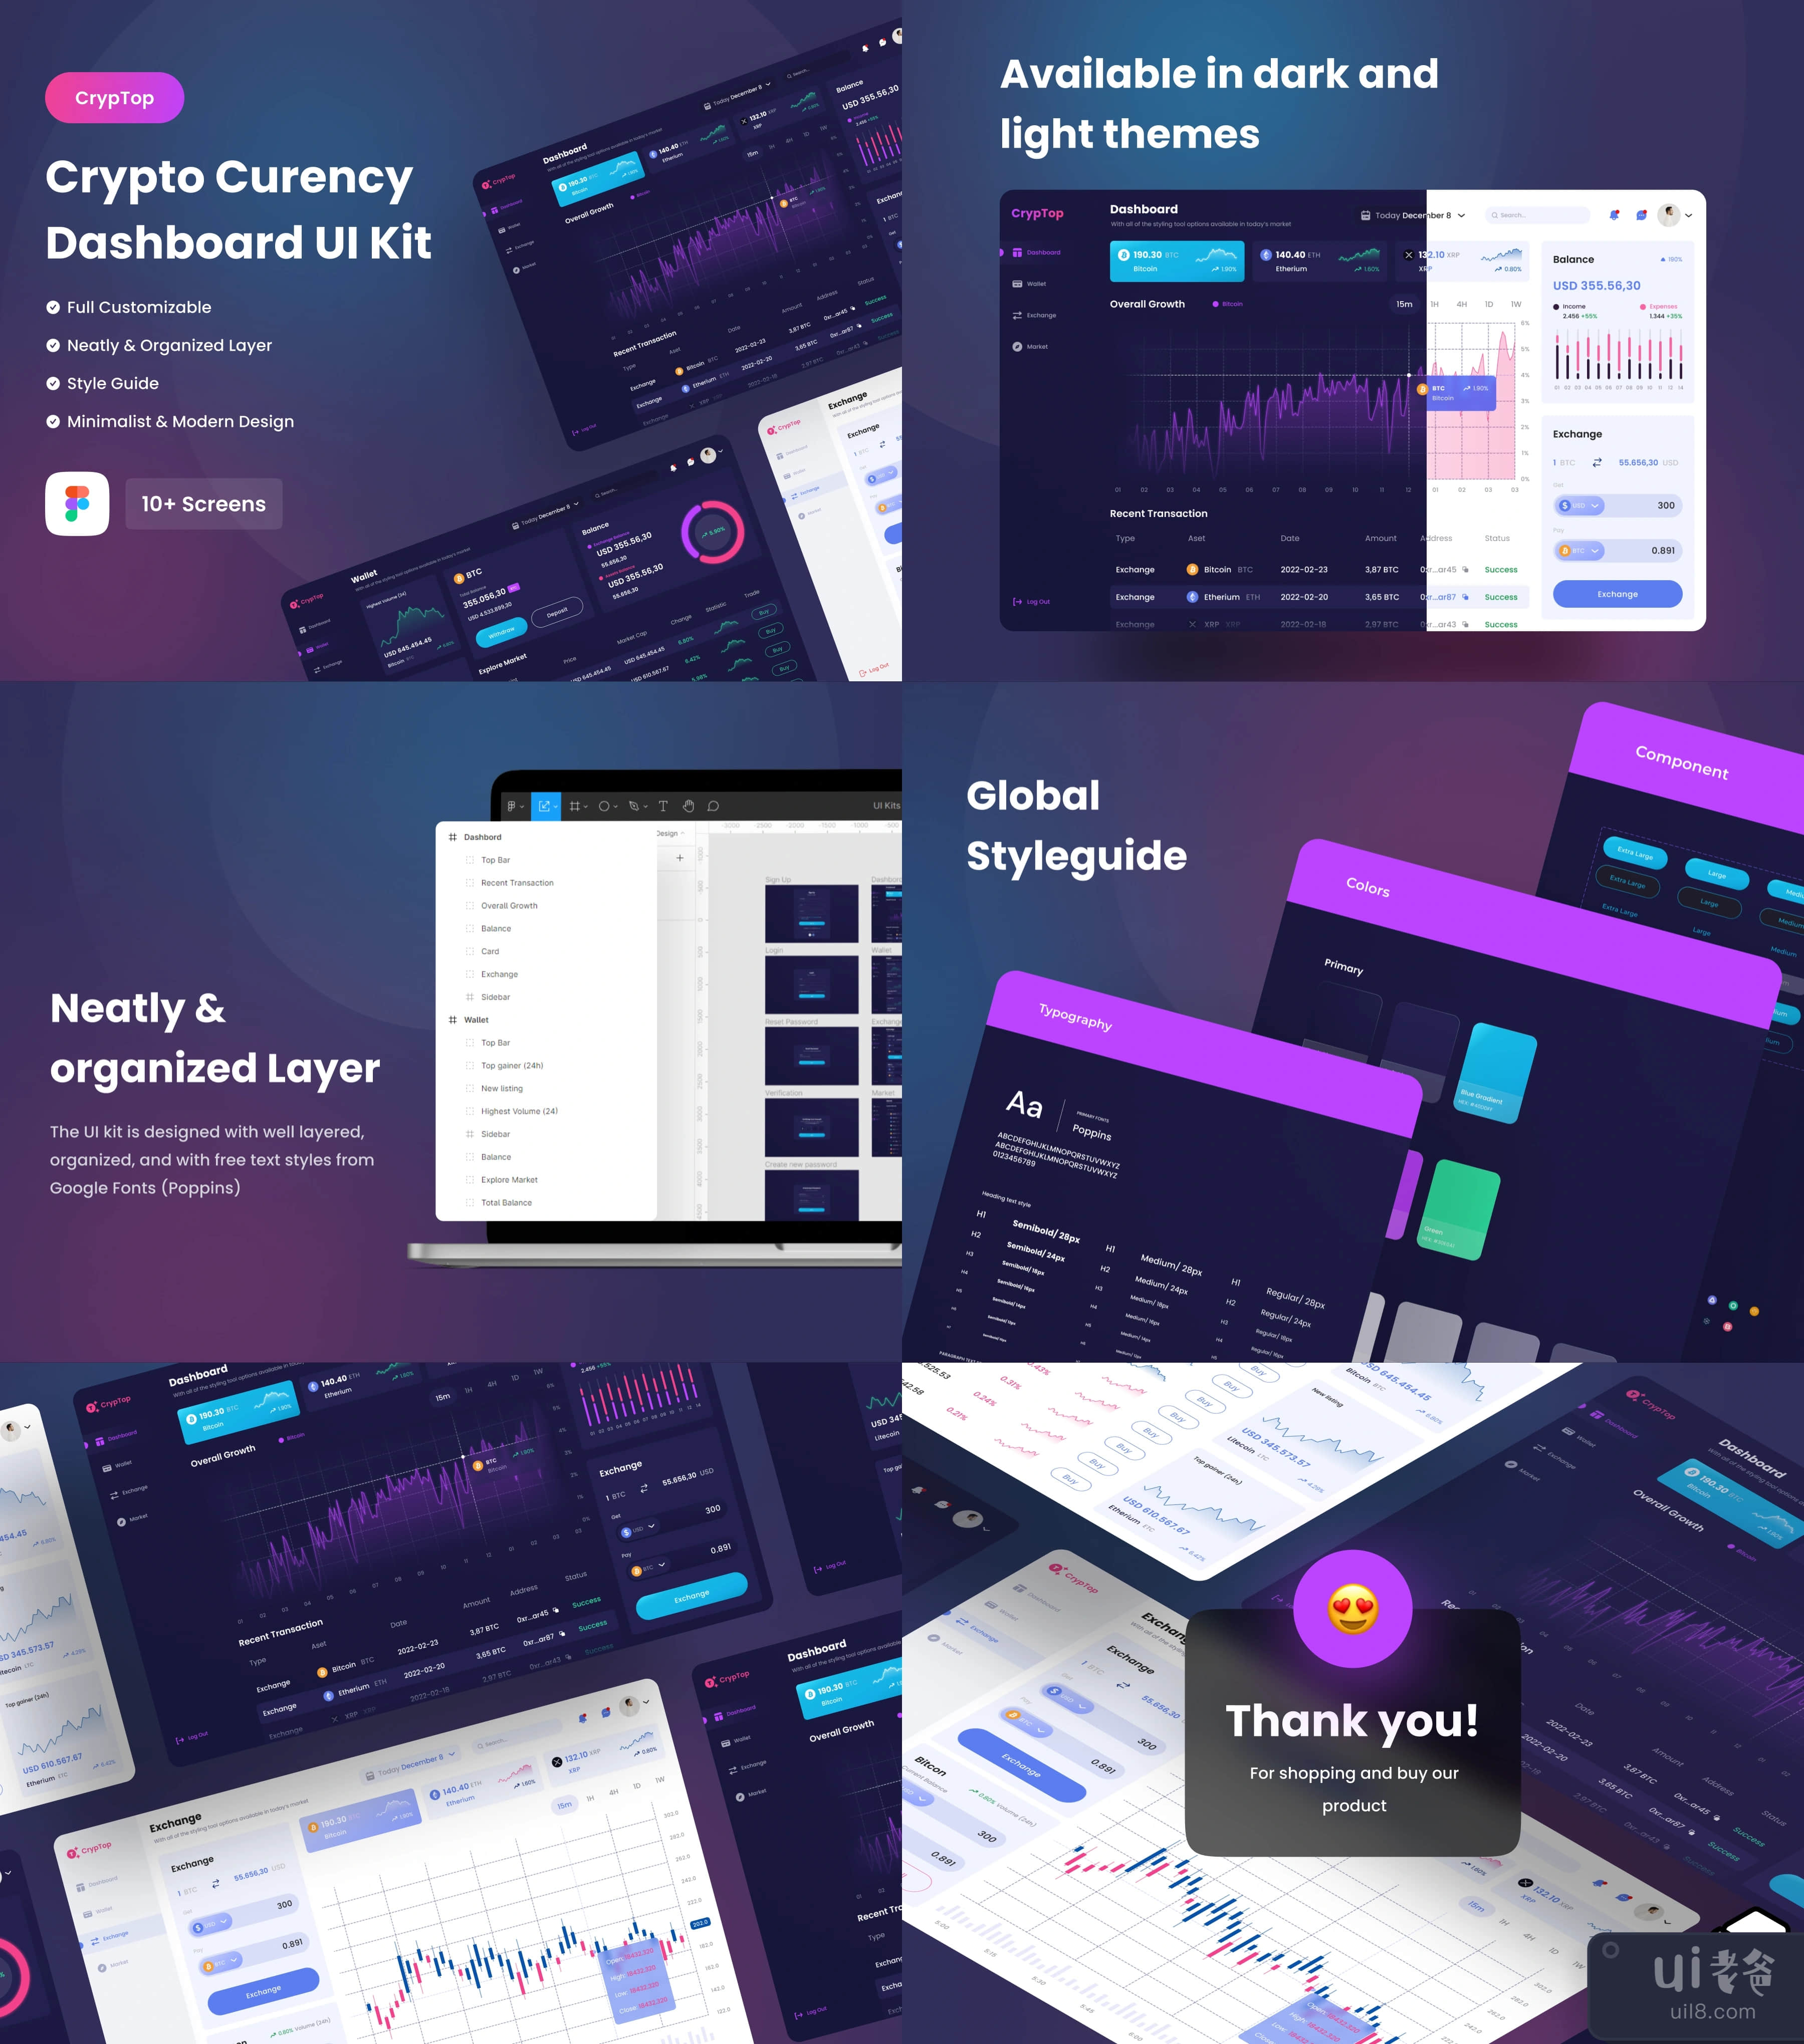 CrypTop - Crypto Curency Dashboard UI Kit (CrypTop - Crypto Curency Dashboard UI Kit)插图1